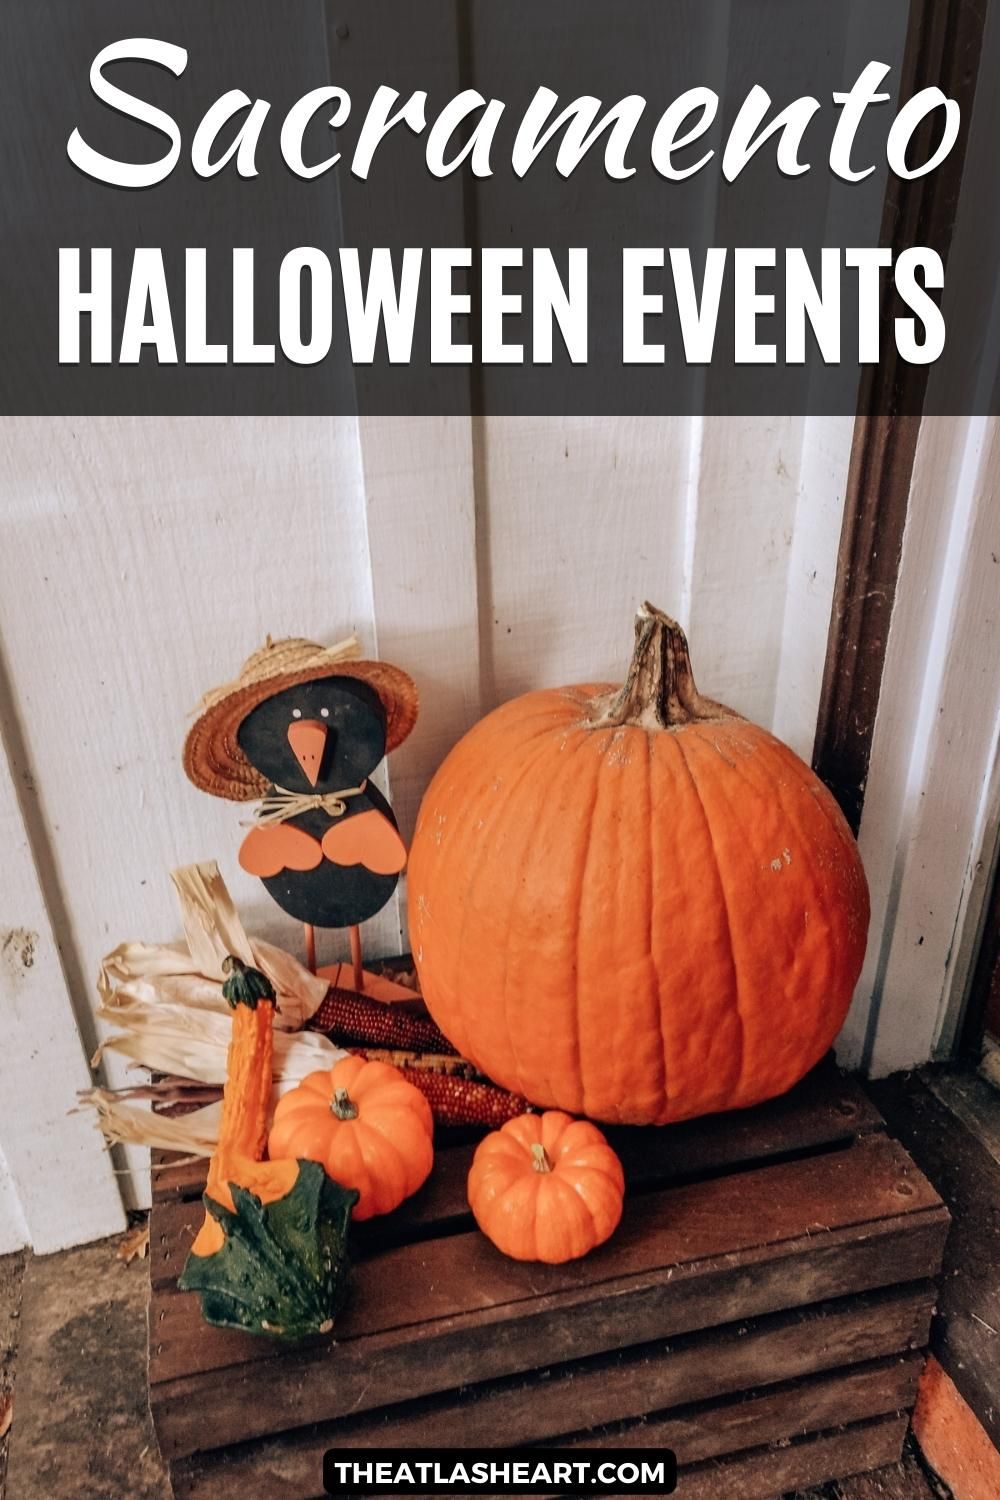  A front porch display of pumpkins, decorative gourds, and Indian corn sitting on a wooden crate, with the text overlay, "Halloween Events in Sacramento."